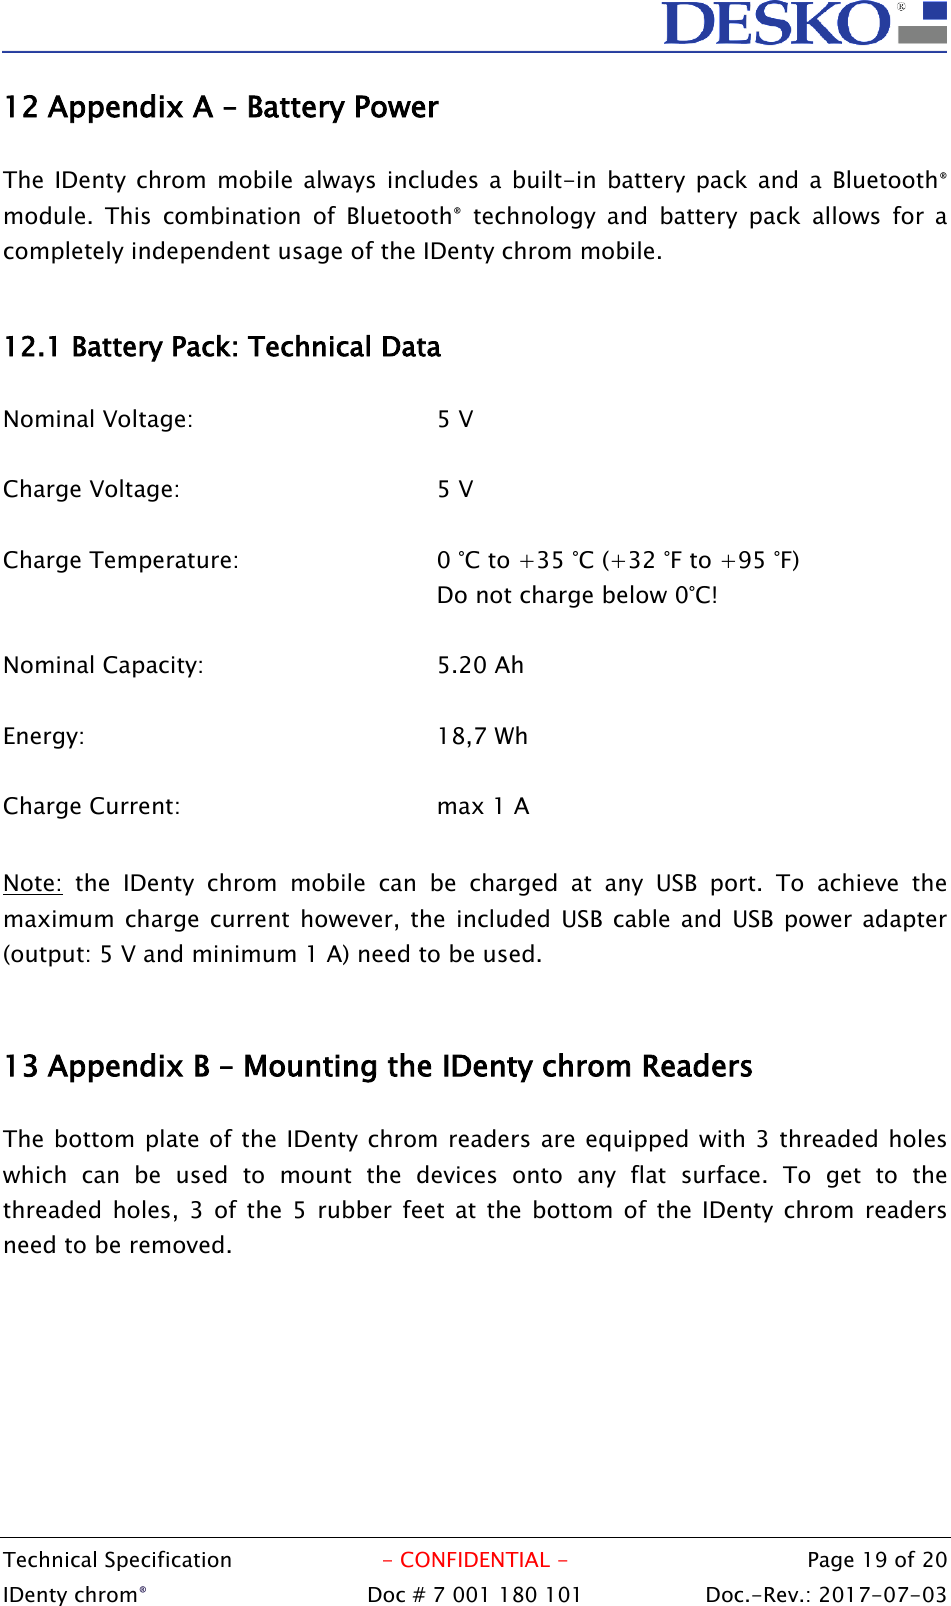  Technical Specification  - CONFIDENTIAL -  Page 19 of 20 IDenty chrom®  Doc # 7 001 180 101   Doc.-Rev.: 2017-07-03   12 Appendix A – Battery Power  The IDenty  chrom mobile  always  includes a built-in battery pack  and  a  Bluetooth® module.  This  combination  of  Bluetooth®  technology  and  battery  pack  allows  for  a completely independent usage of the IDenty chrom mobile.   12.1 Battery Pack: Technical Data  Nominal Voltage: 5 V  Charge Voltage: 5 V  Charge Temperature:  0 °C to +35 °C (+32 °F to +95 °F) Do not charge below 0°C!  Nominal Capacity: 5.20 Ah  Energy: 18,7 Wh  Charge Current: max 1 A  Note:  the  IDenty  chrom  mobile  can  be  charged  at  any  USB  port.  To  achieve  the maximum charge  current  however, the included  USB cable and  USB  power adapter (output: 5 V and minimum 1 A) need to be used.   13 Appendix B – Mounting the IDenty chrom Readers  The bottom plate of the IDenty chrom readers are equipped with 3 threaded holes which  can  be  used  to  mount  the  devices  onto  any  flat  surface.  To  get  to  the threaded  holes, 3 of the 5  rubber  feet  at  the bottom of  the IDenty chrom readers need to be removed. 